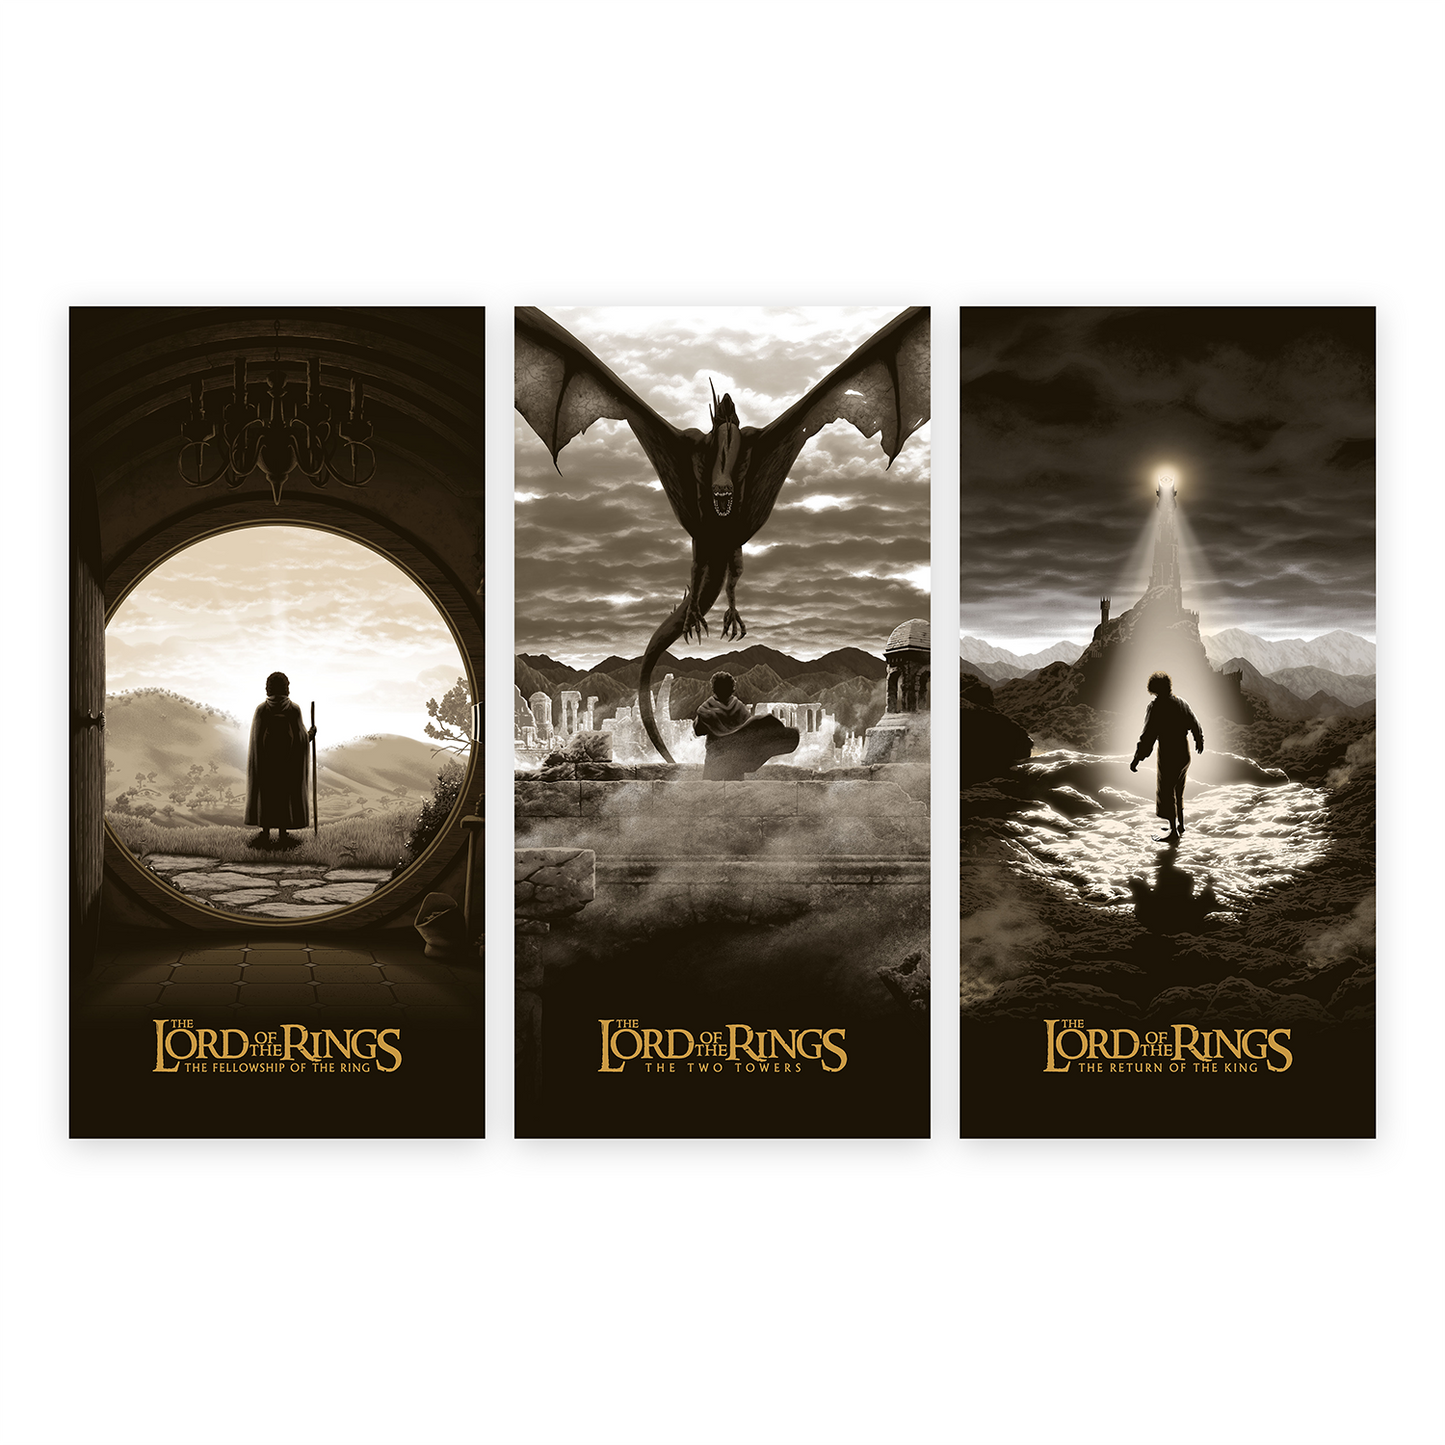 Florey "The Lord of the Rings: Trilogy" Variant